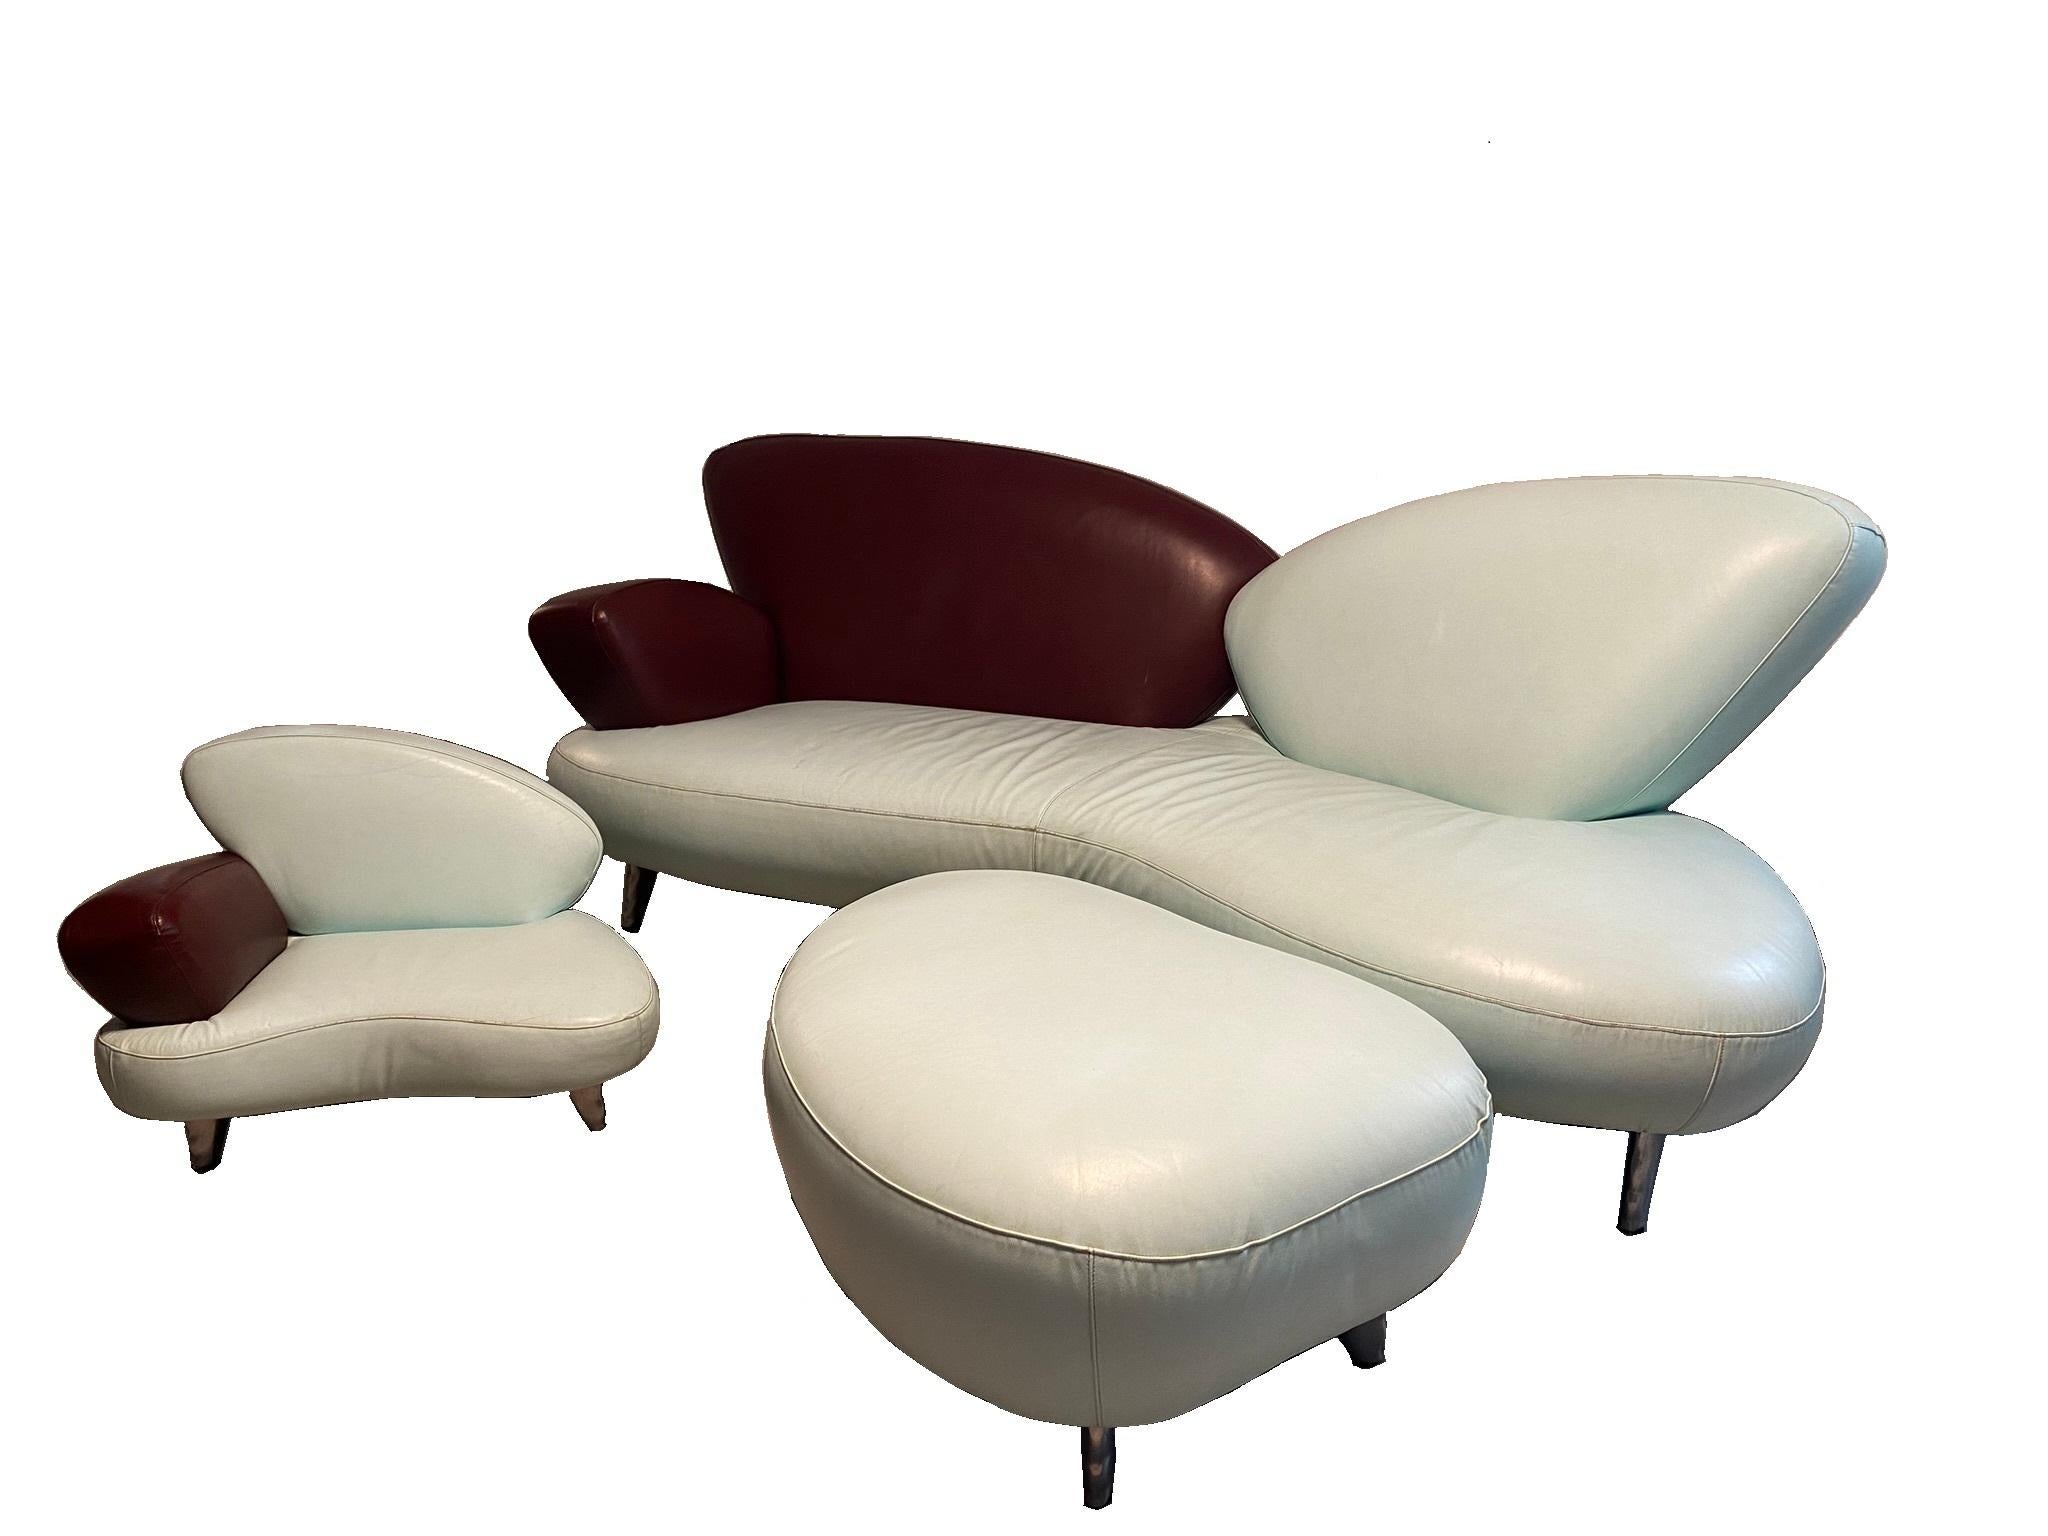 Set of three pîeces in leather Italian manifacture Poltromet 
1 Big Sofa cm 230-cm 105-height cm 85
1 Pouf cm 90-cm 65
1 Small or miniature Sofa cm 70-cm65 
Poltromet was an important Itàlîan manufacture from the seventies to the eîghties , to